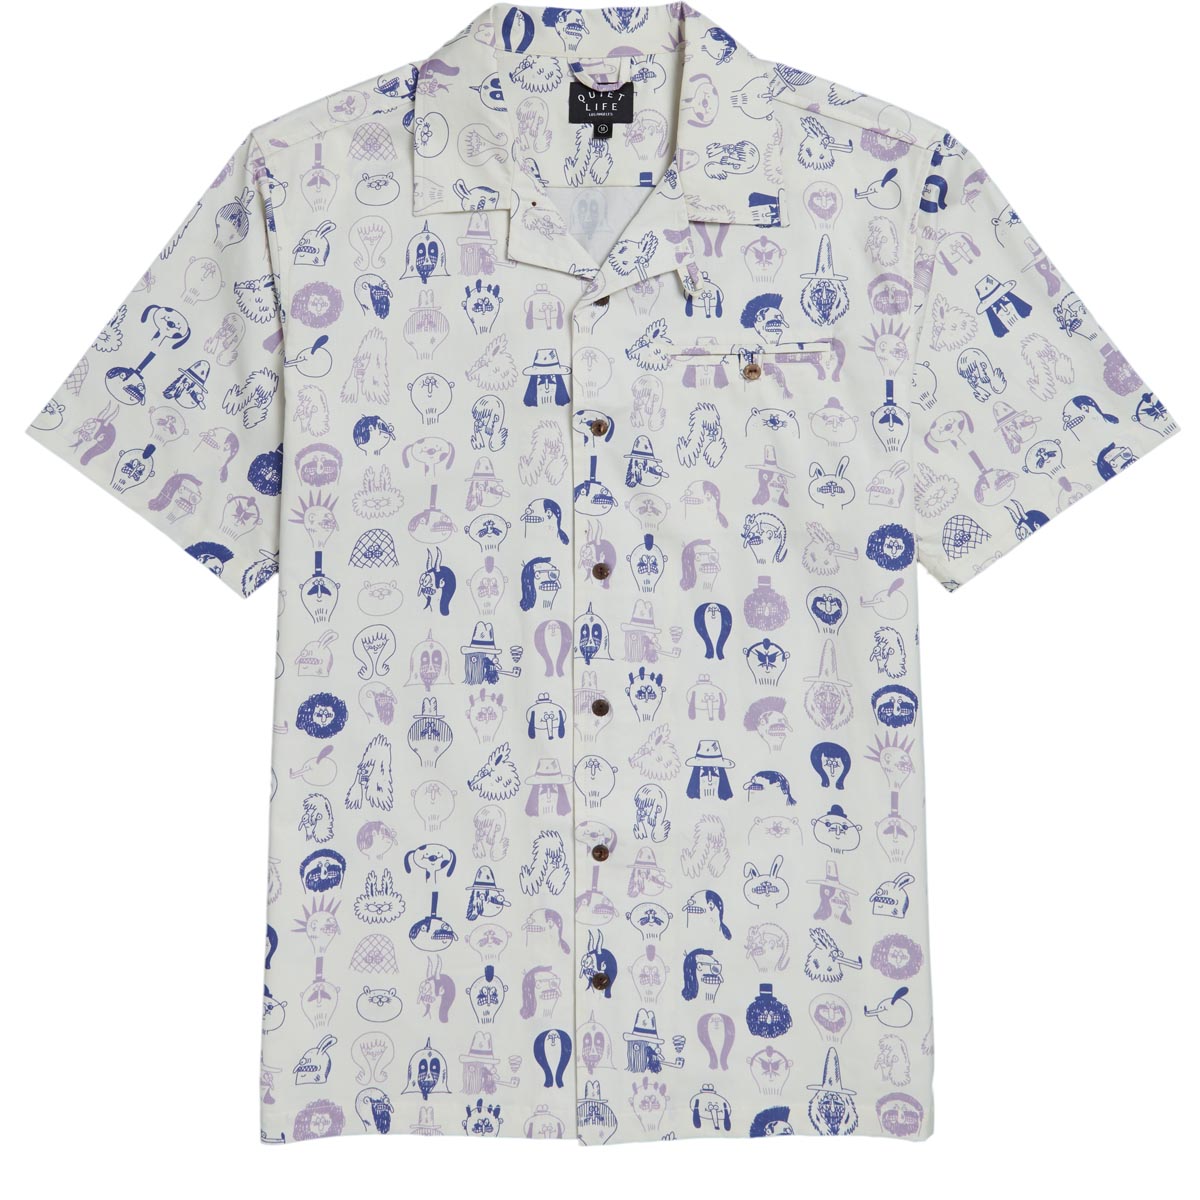 The Quiet Life x Jay Howell Button Down Shirt - Off White image 1